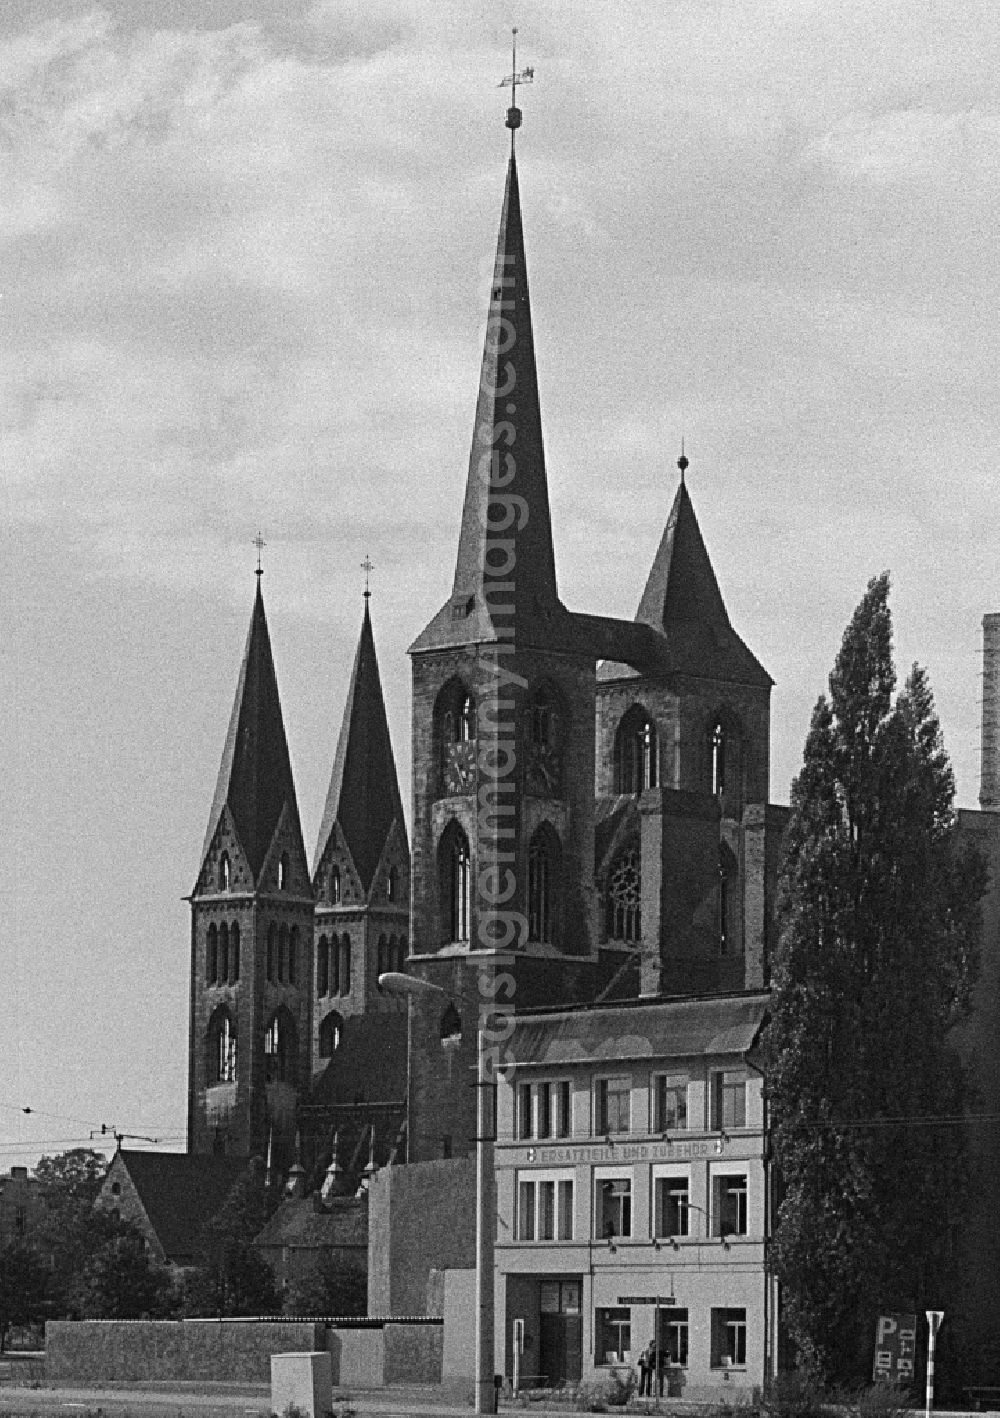 GDR photo archive: Halberstadt - Facade and roof structure of the sacral building of the church Martinikirche aus Richtung Kuehlinger Strasse in Halberstadt in the state Saxony-Anhalt on the territory of the former GDR, German Democratic Republic